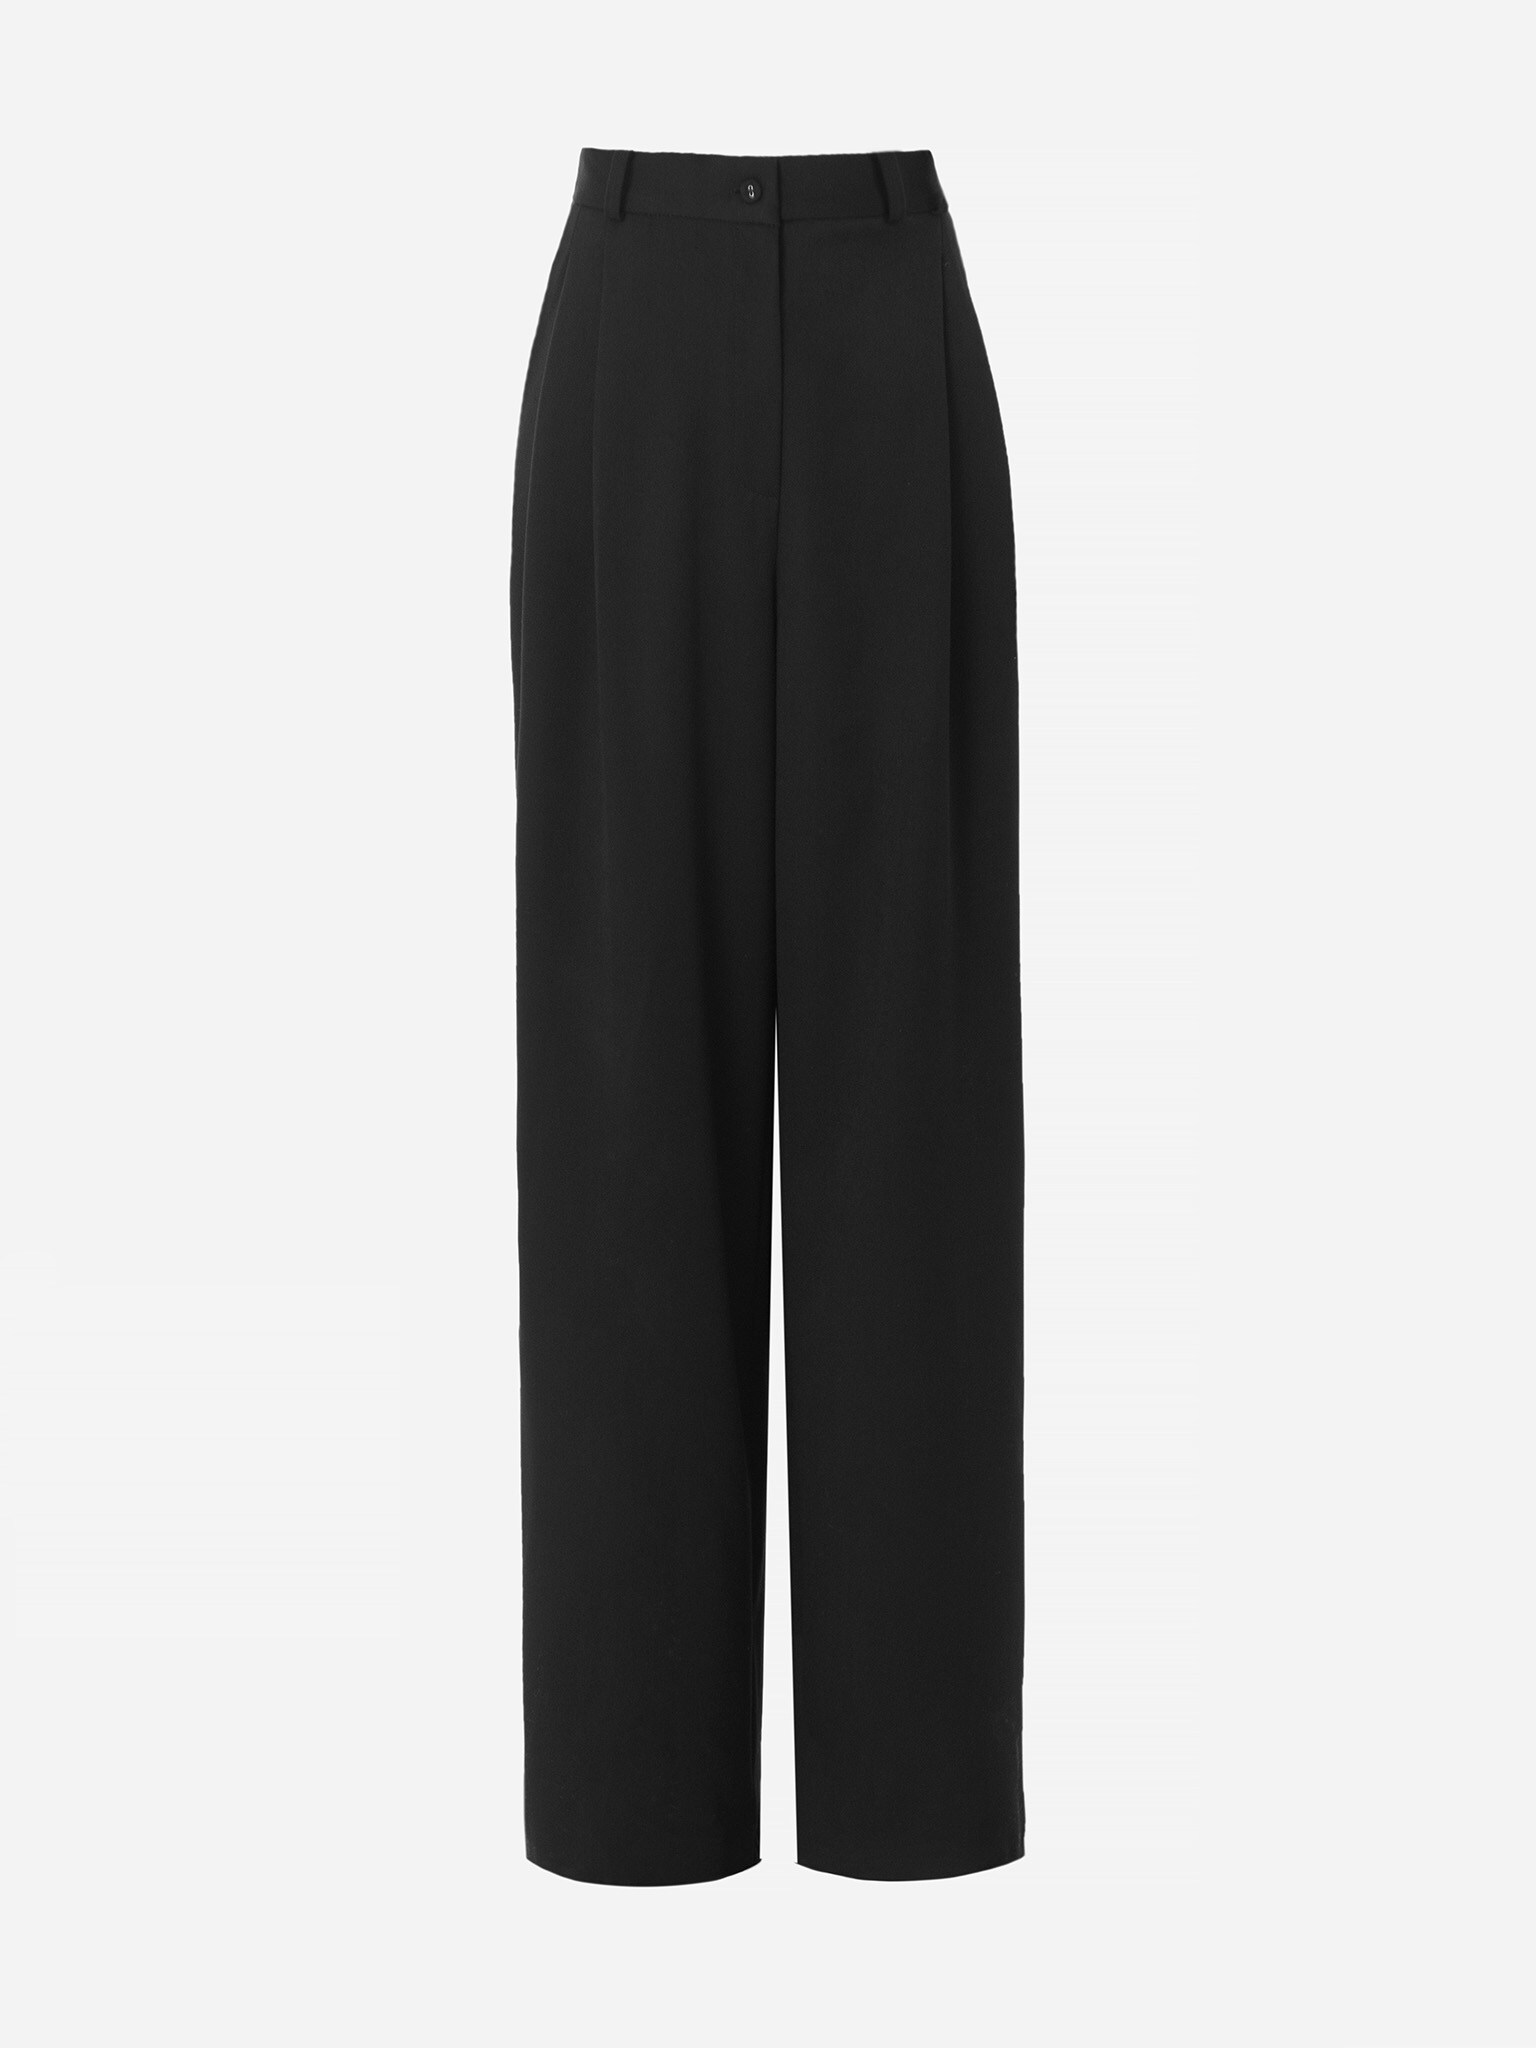 High Waist Pleated Pants With Tailored Vest Style Top In Black